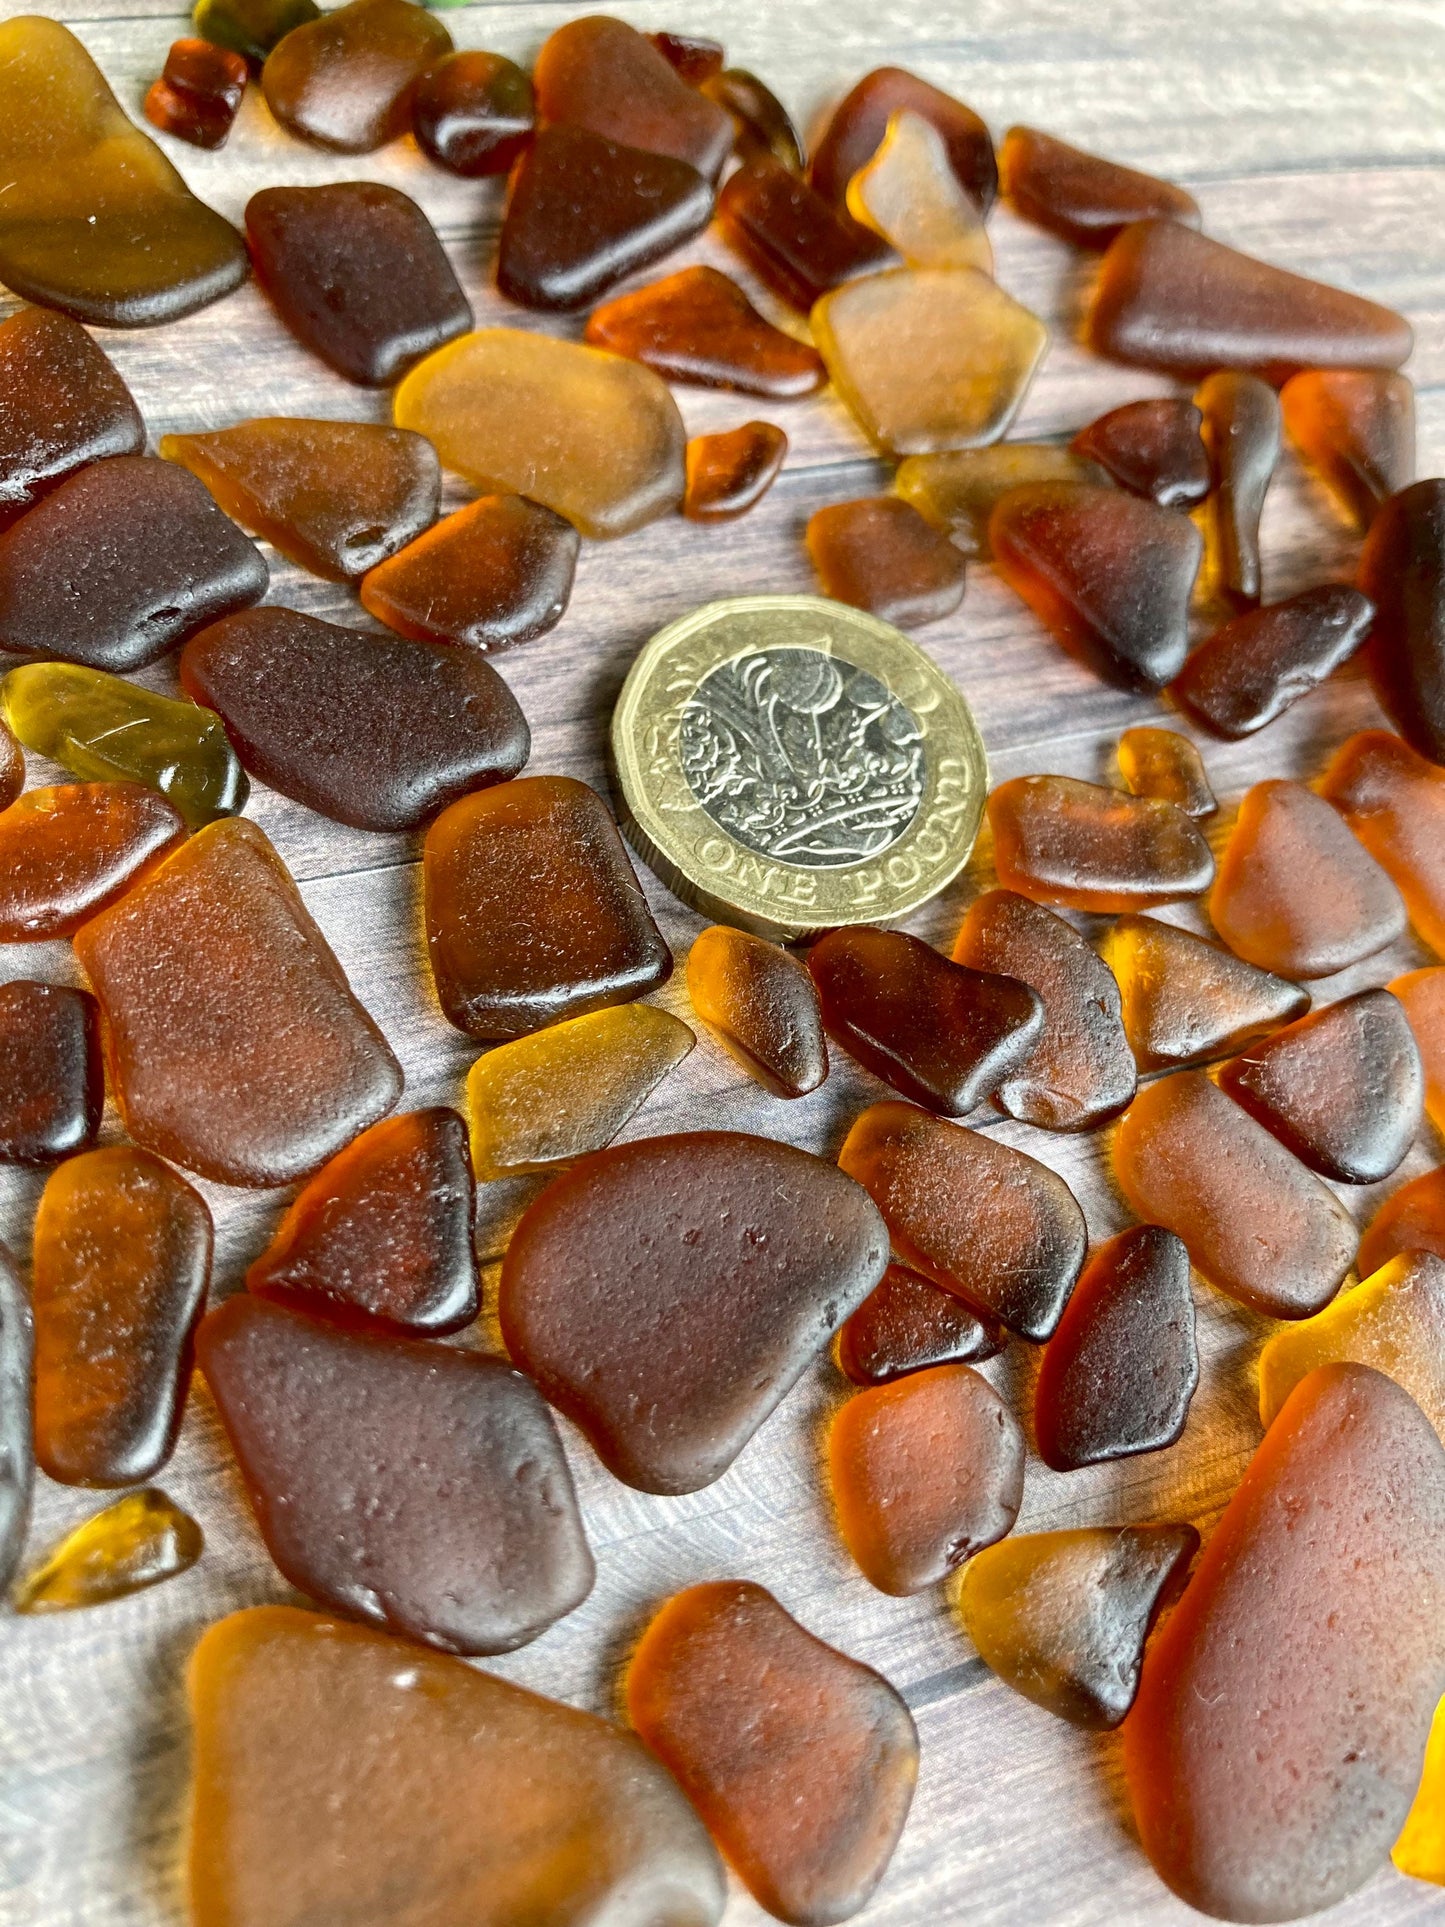 Brown sea glass 20 pieces/beach glass collected from Queensferry beach Scotland in 2022